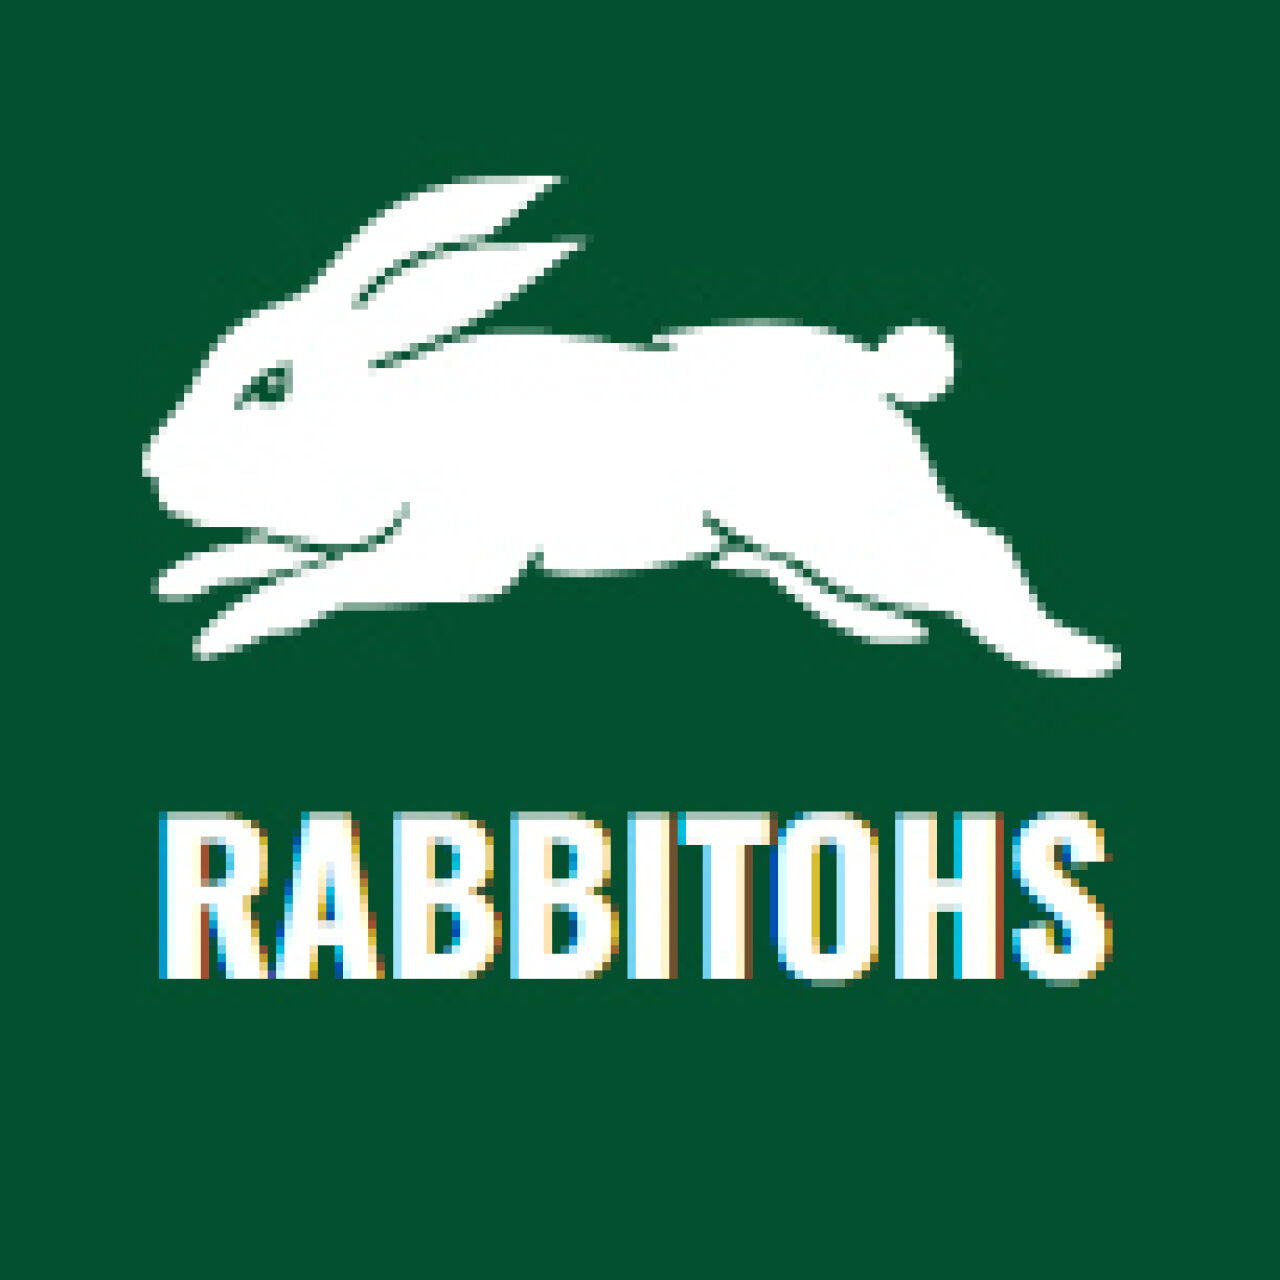 WIN 4 x Corporate tickets to Round 27 Rabbitohs vs Roosters Sep 1, Accor Stadium 